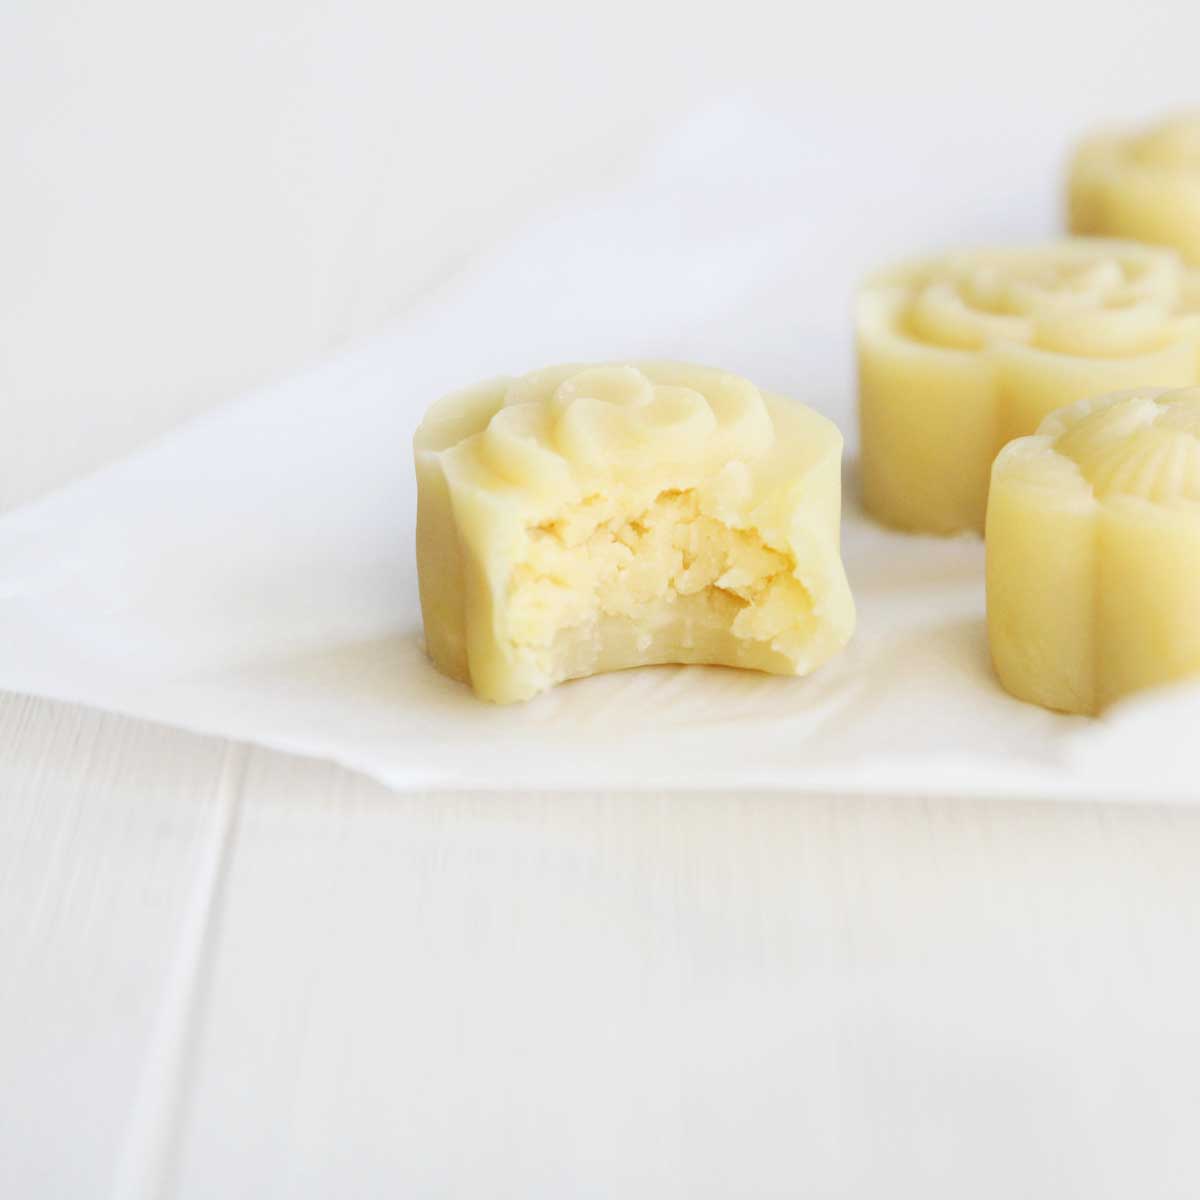 Homemade Durian Snow Skin Mooncakes with Mung Bean Filling - Durian Snow Skin Mooncakes